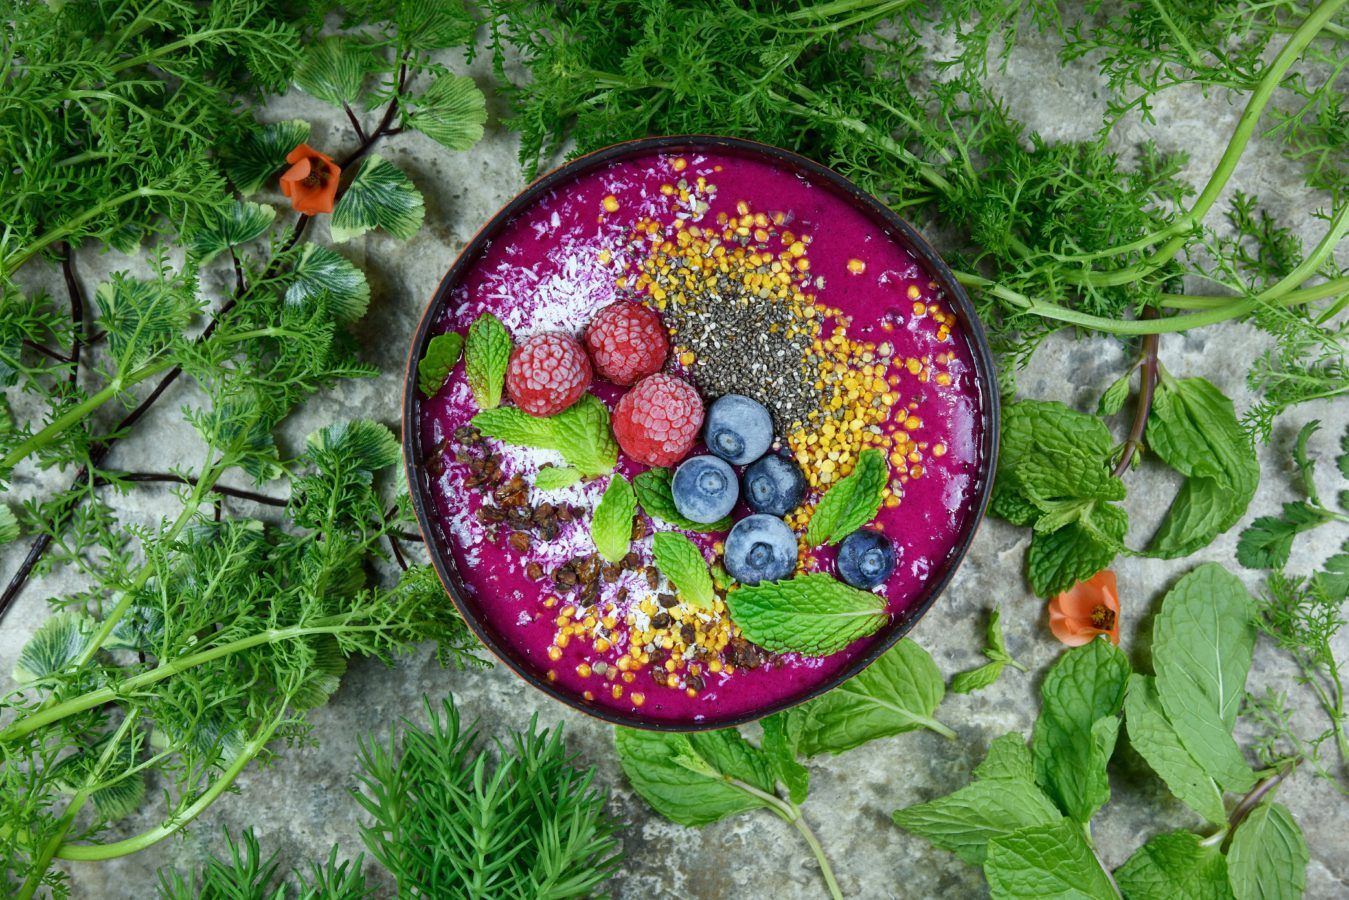 Rainbow smoothie bowls that are equally nutritious and delicious